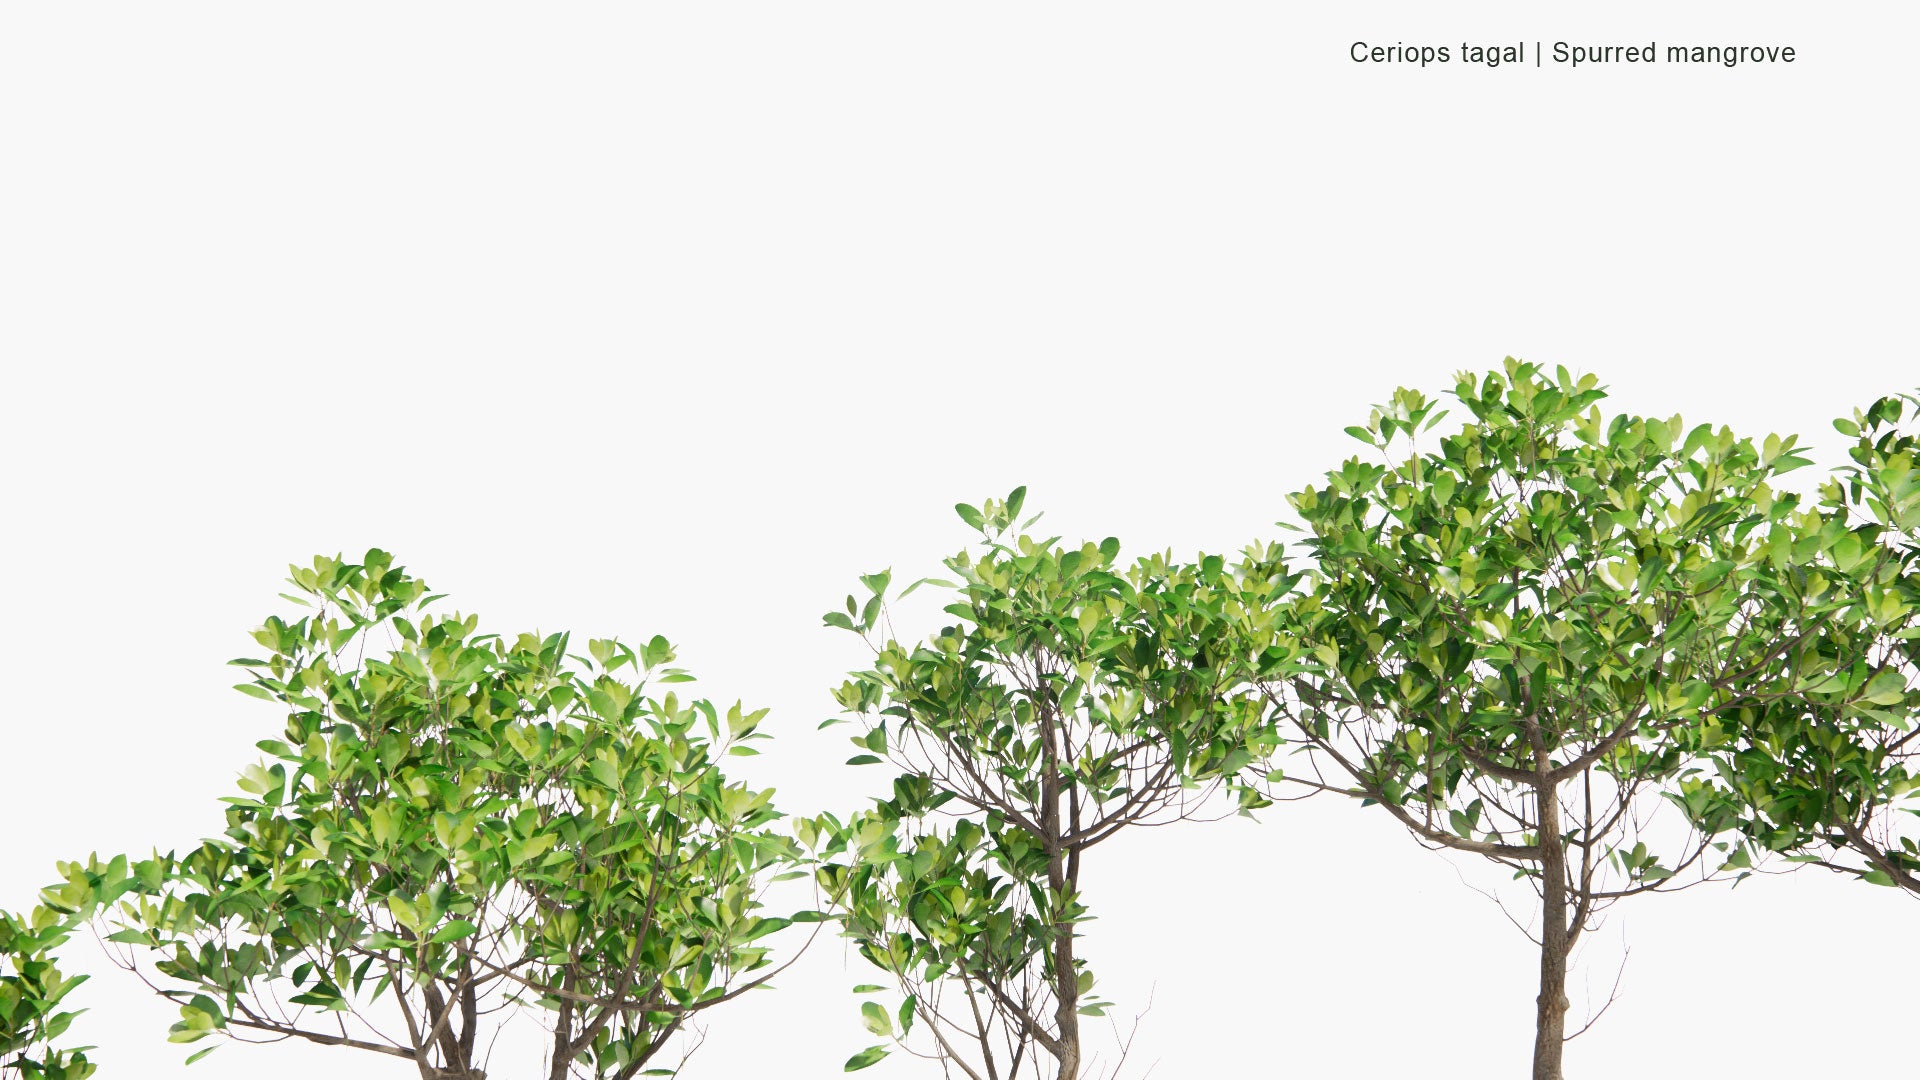 Low Poly Ceriops Tagal - Spurred Mangrove, Indian Mangrove (3D Model)